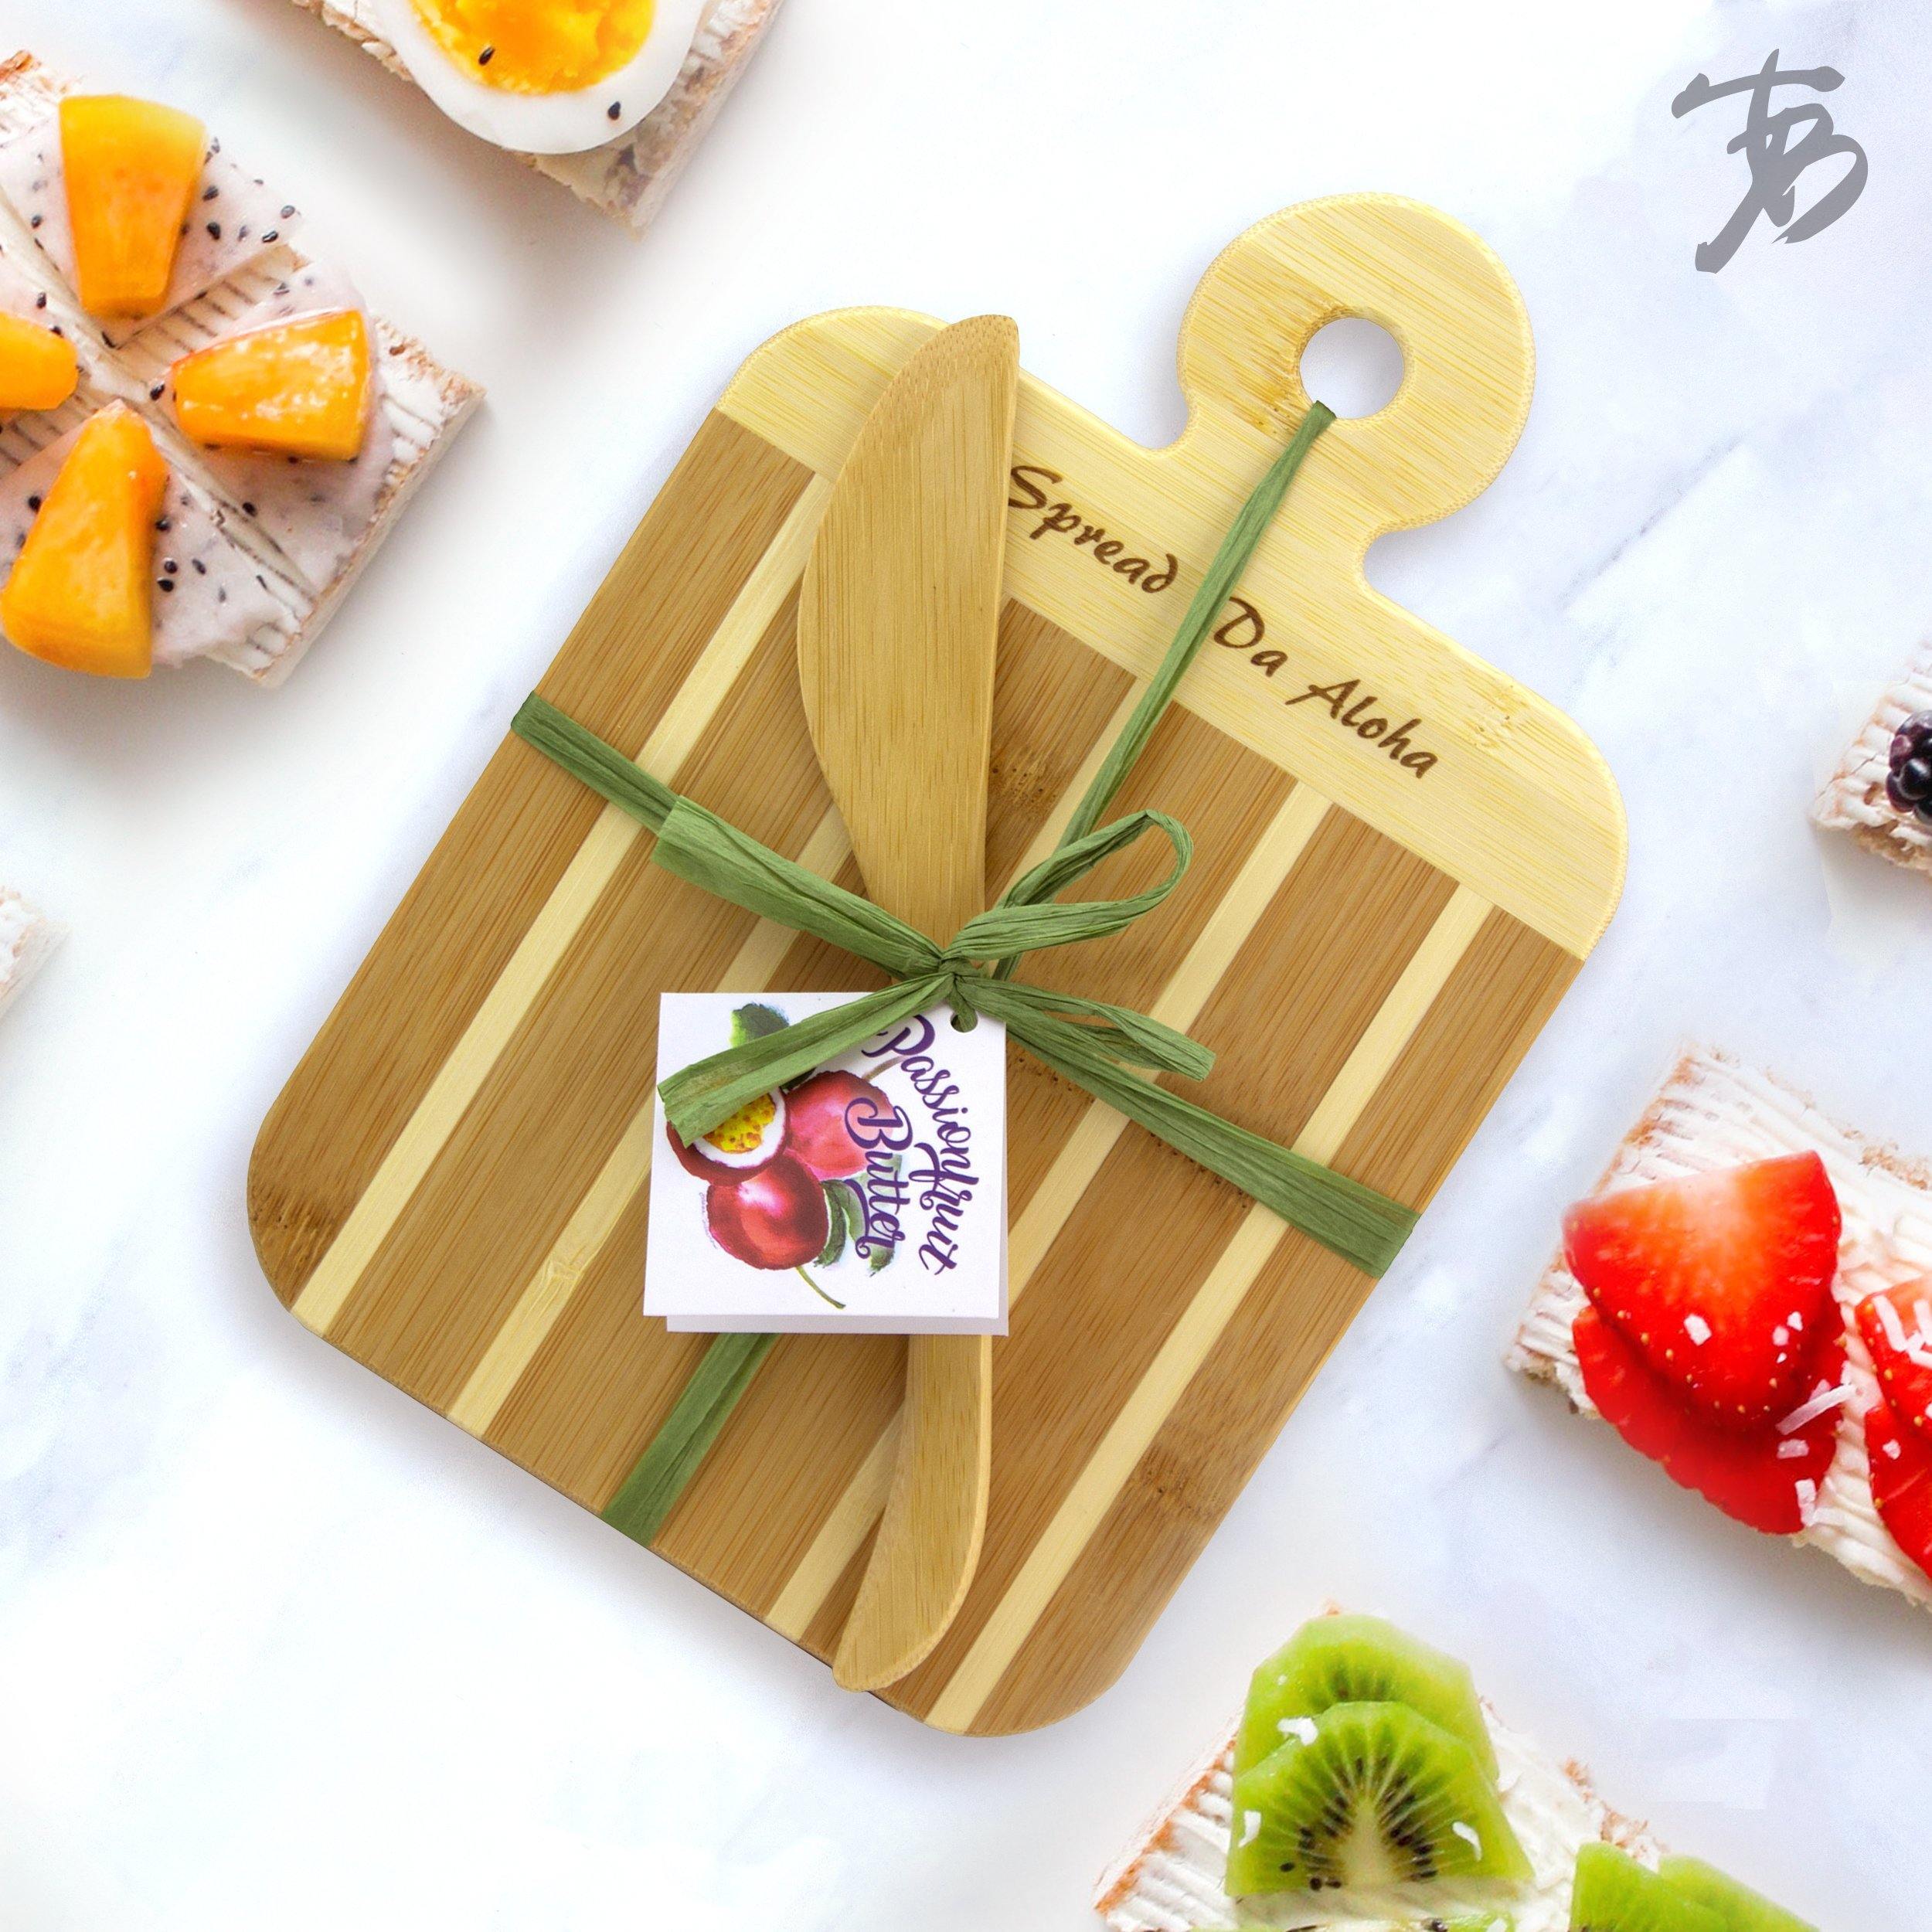 Totally Bamboo "Spread Da Aloha" Serving and Cutting Board with Spreader Knife Gift Set